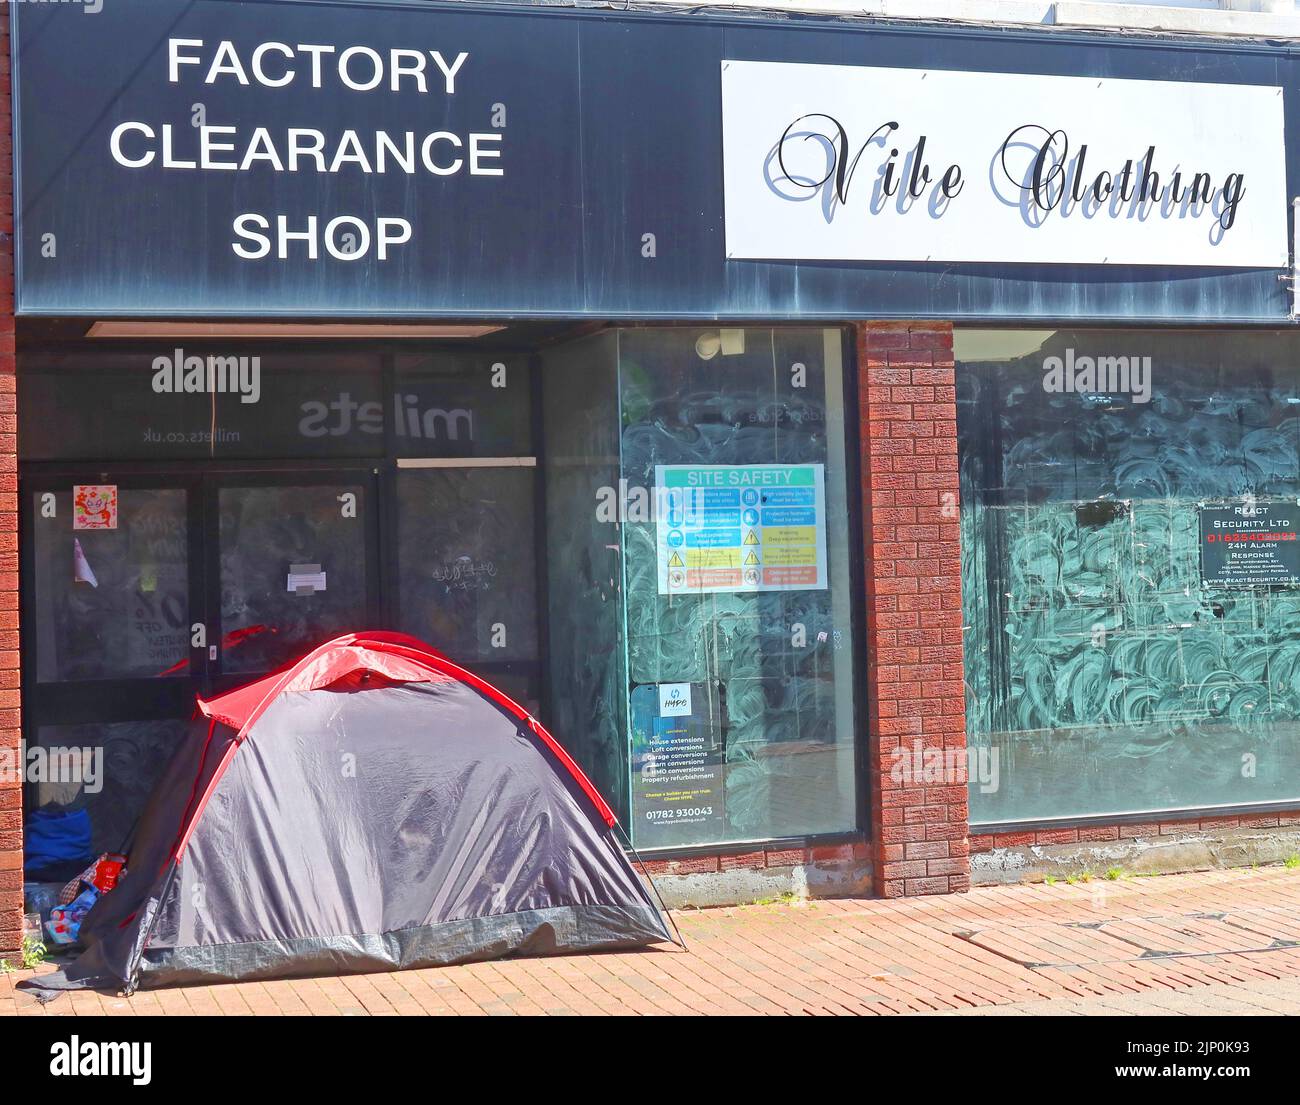 A deserted closed down fashion factory clearance shop, with homeless sleeper, with tent in store doorway, Mill Street, Macclesfield, Cheshire,England Stock Photo